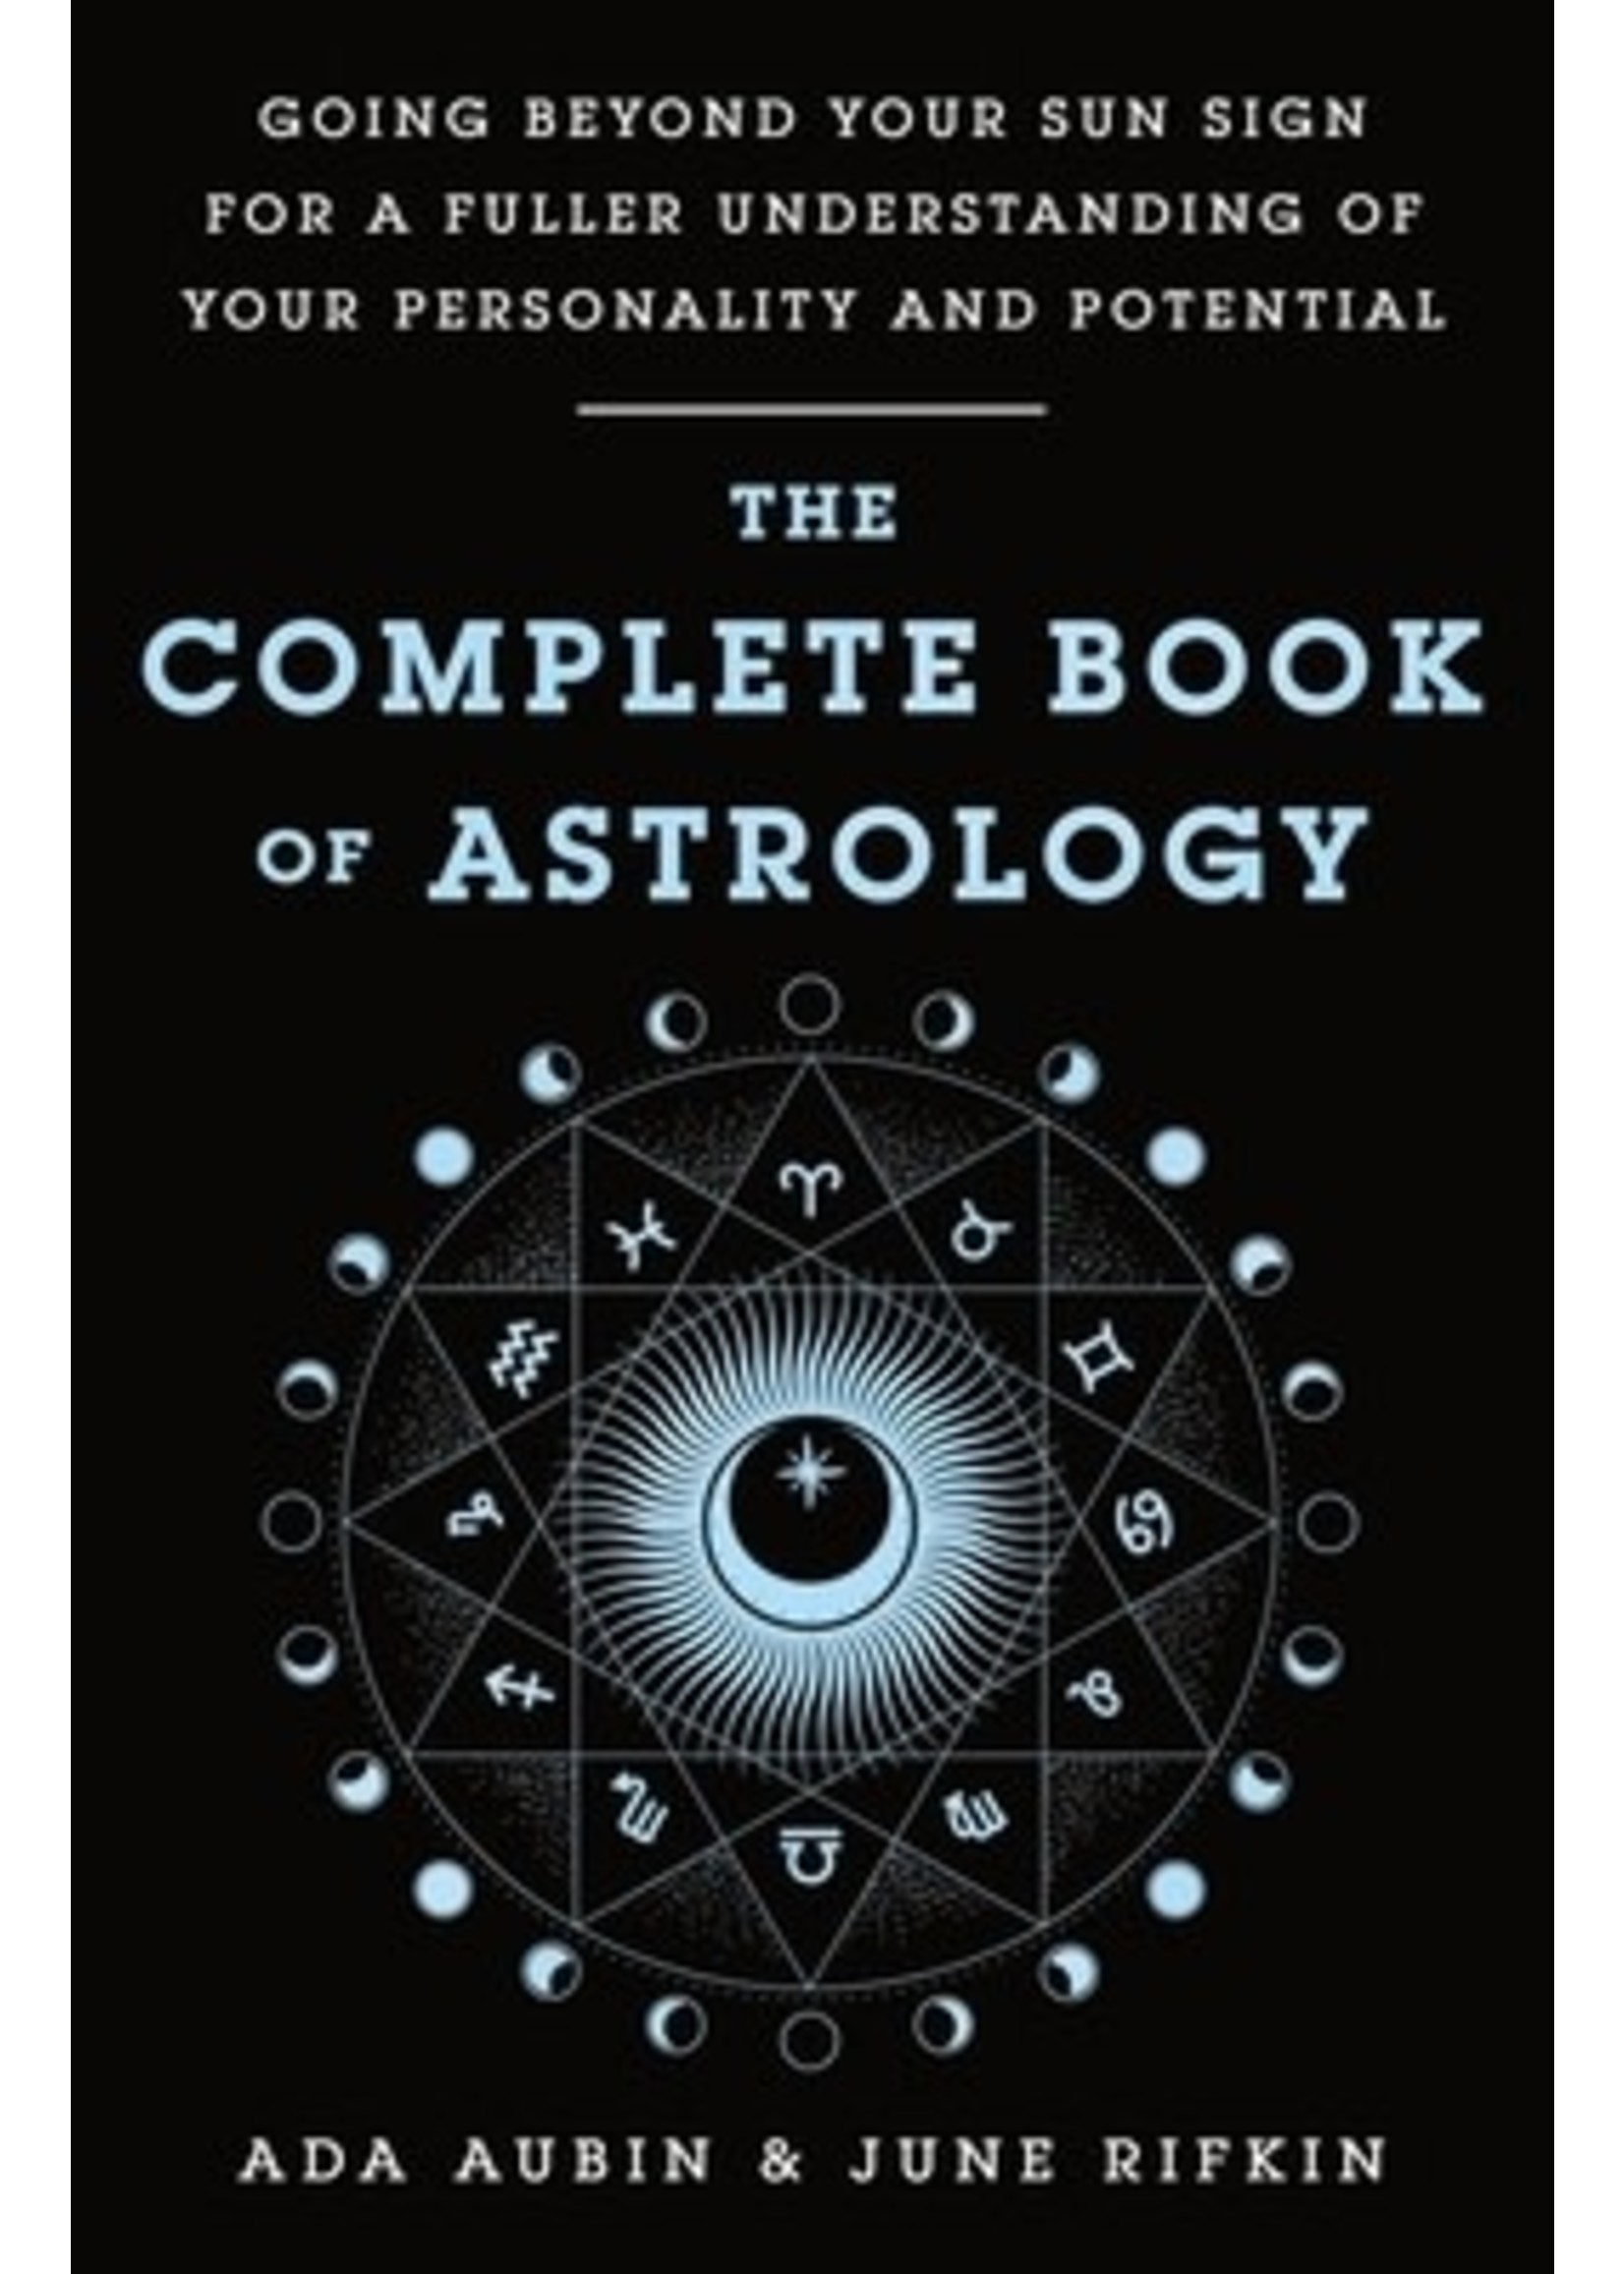 The Complete Book of Astrology by Ada Aubin, June Rifkin